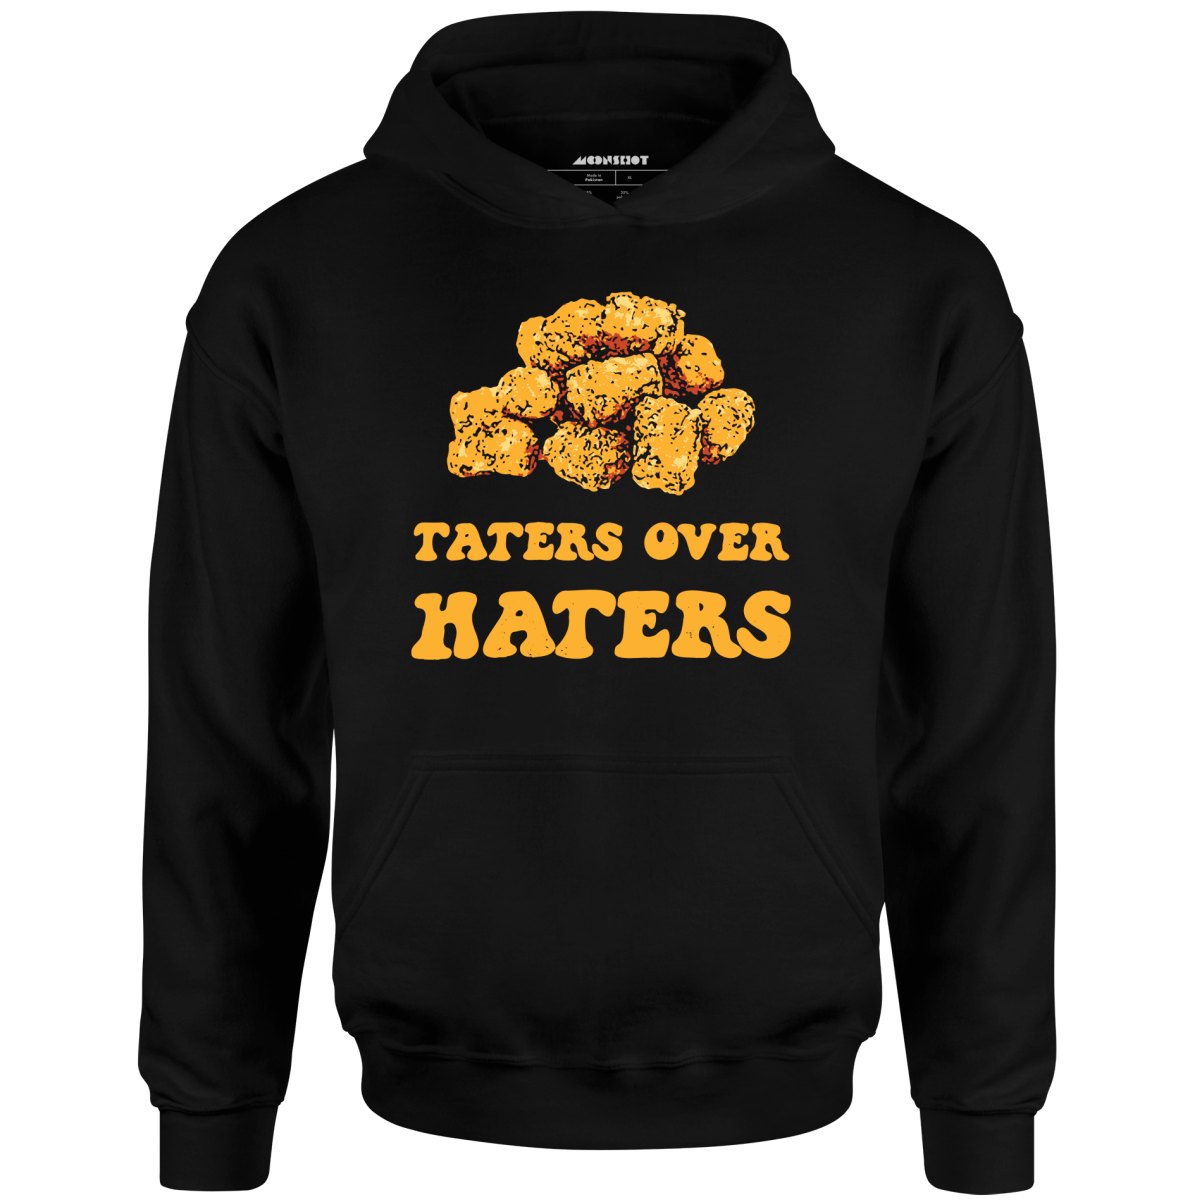 Taters Over Haters - Unisex Hoodie